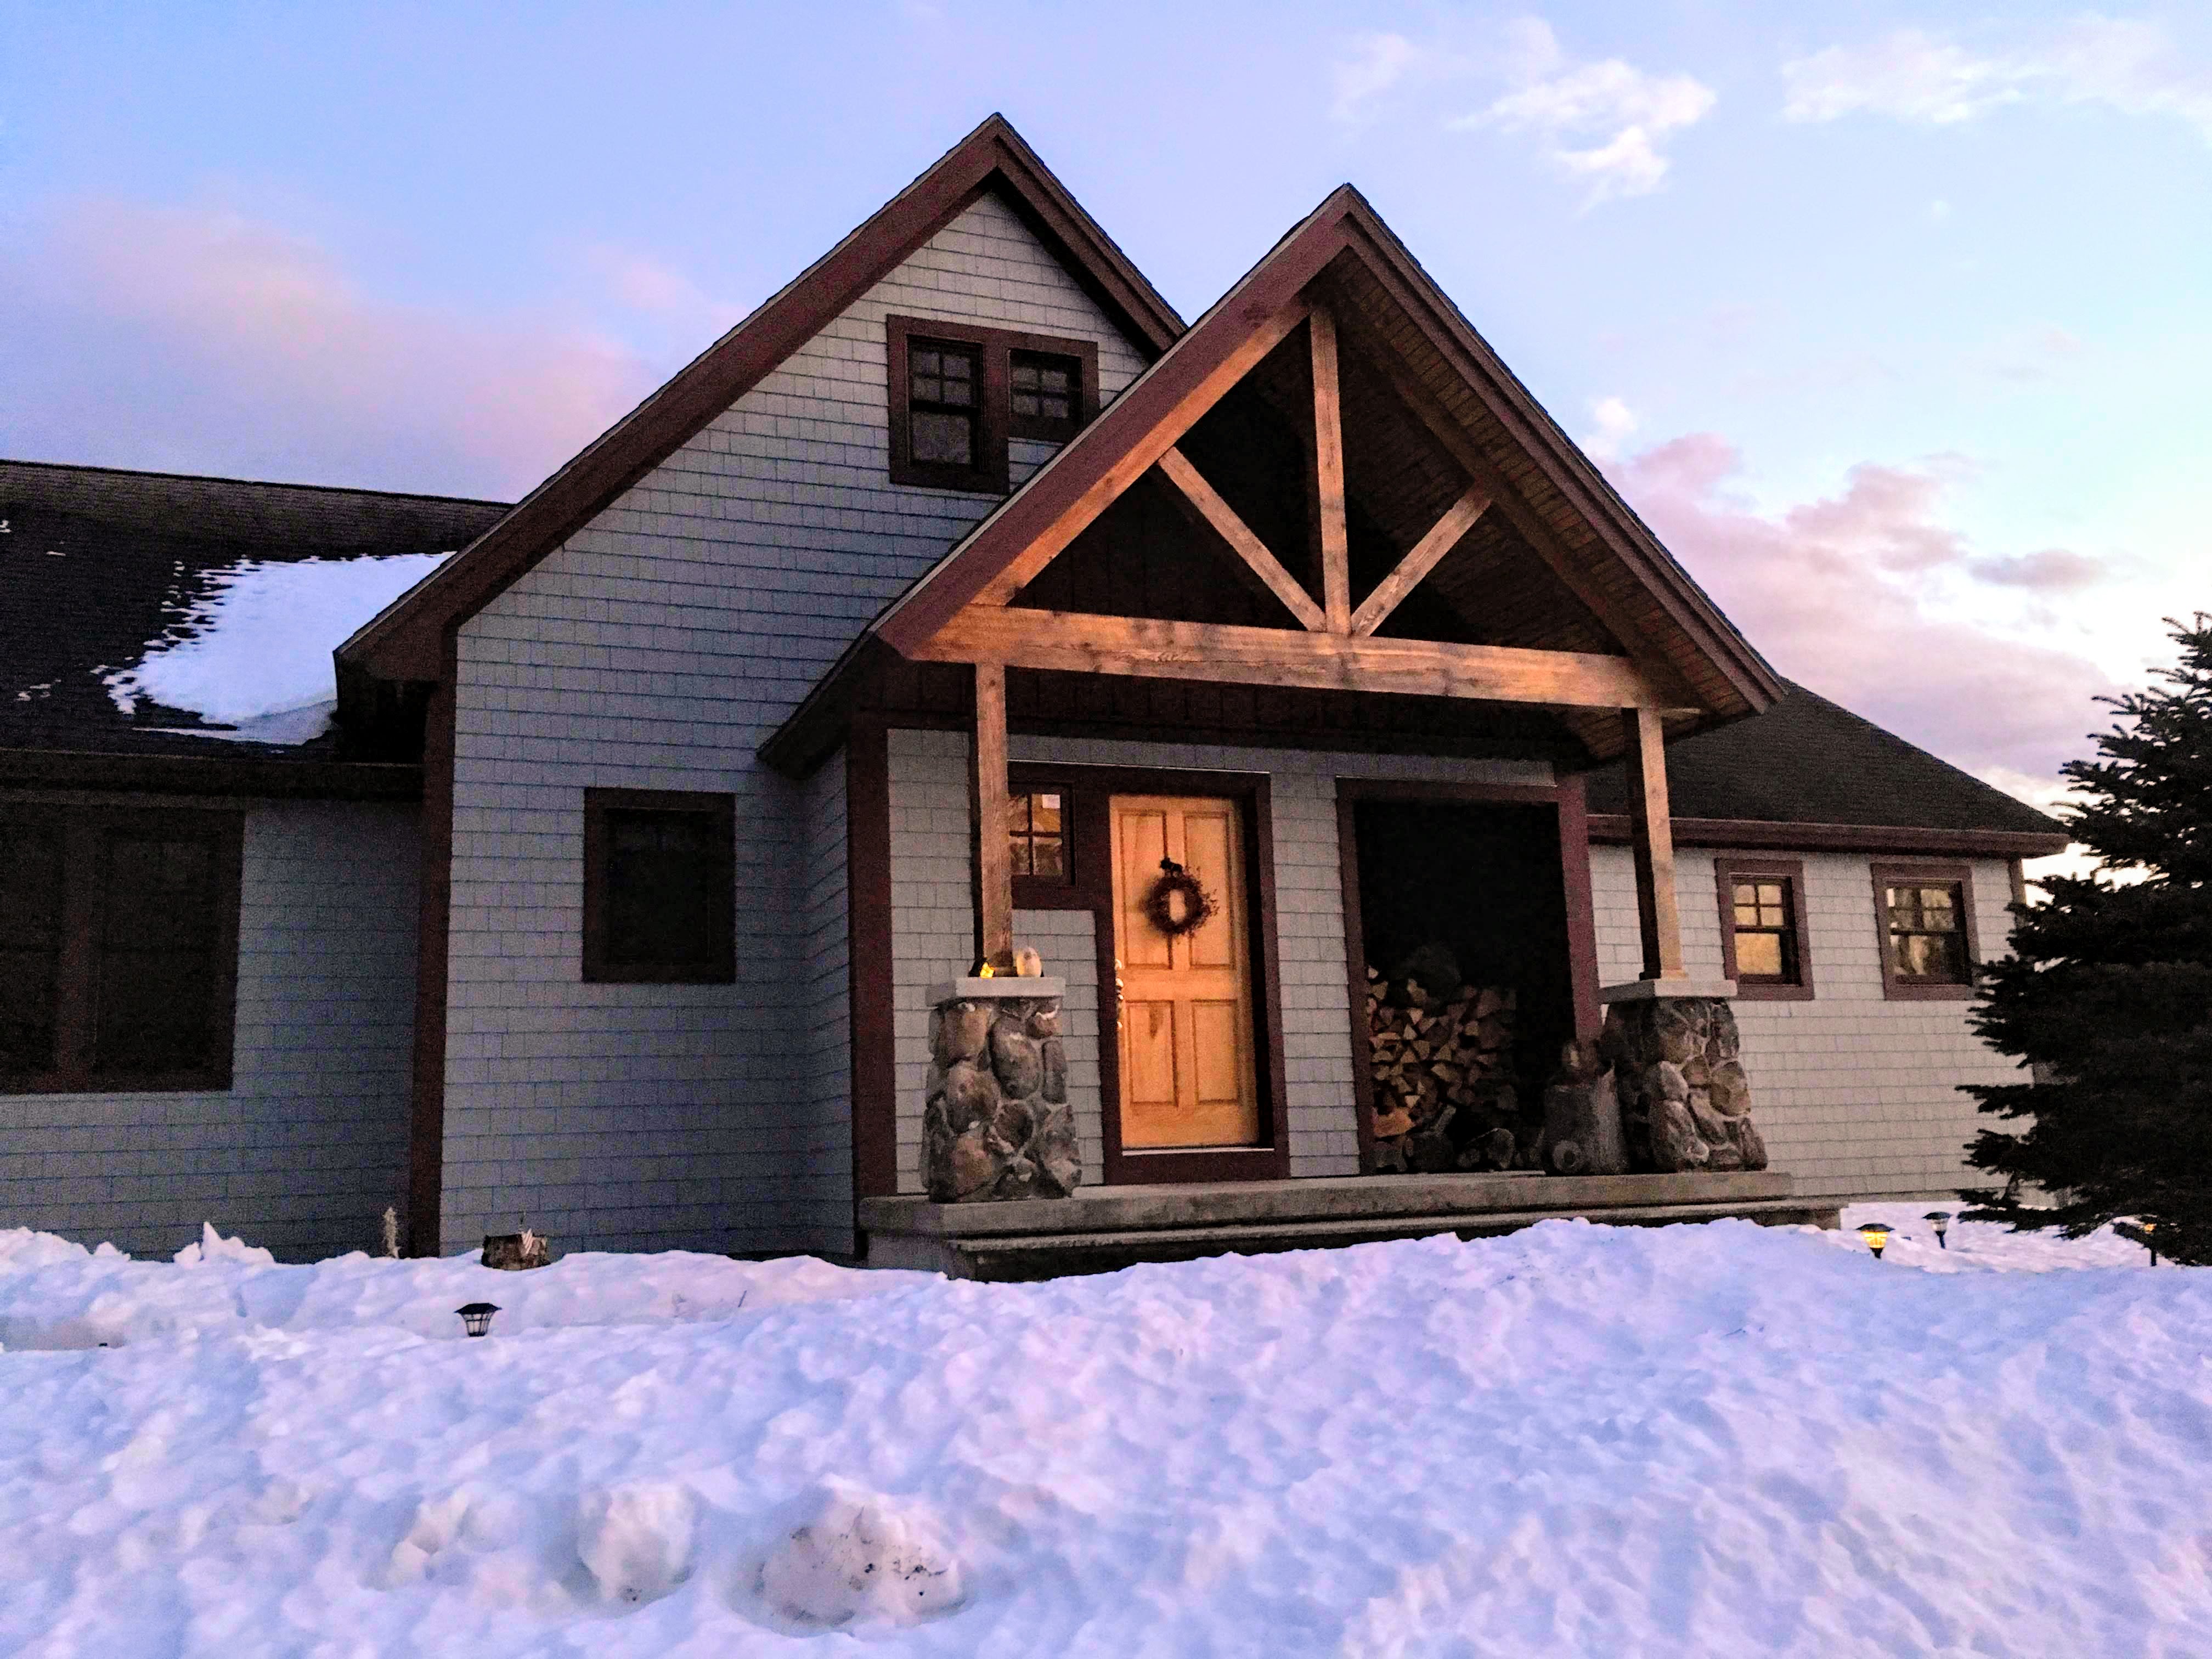 Perched on the hills above Franconia, right at the entrance to Franconia Notch, this beautiful craftsman home will wow you with its view of Cannon Mountain and the surrounding mountains.